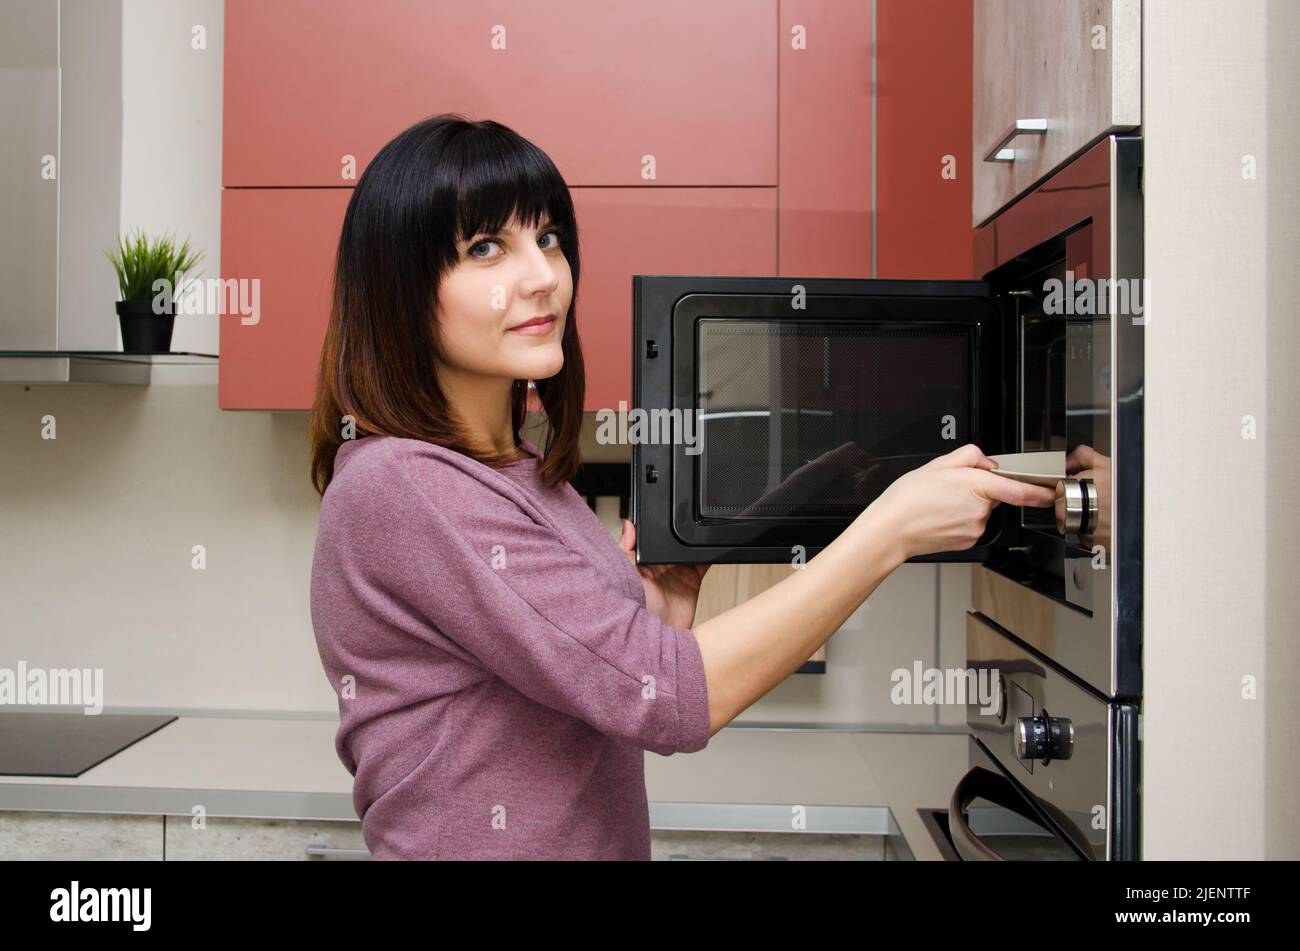 A young woman looks at the camera and takes out a plate from the microwave Stock Photo